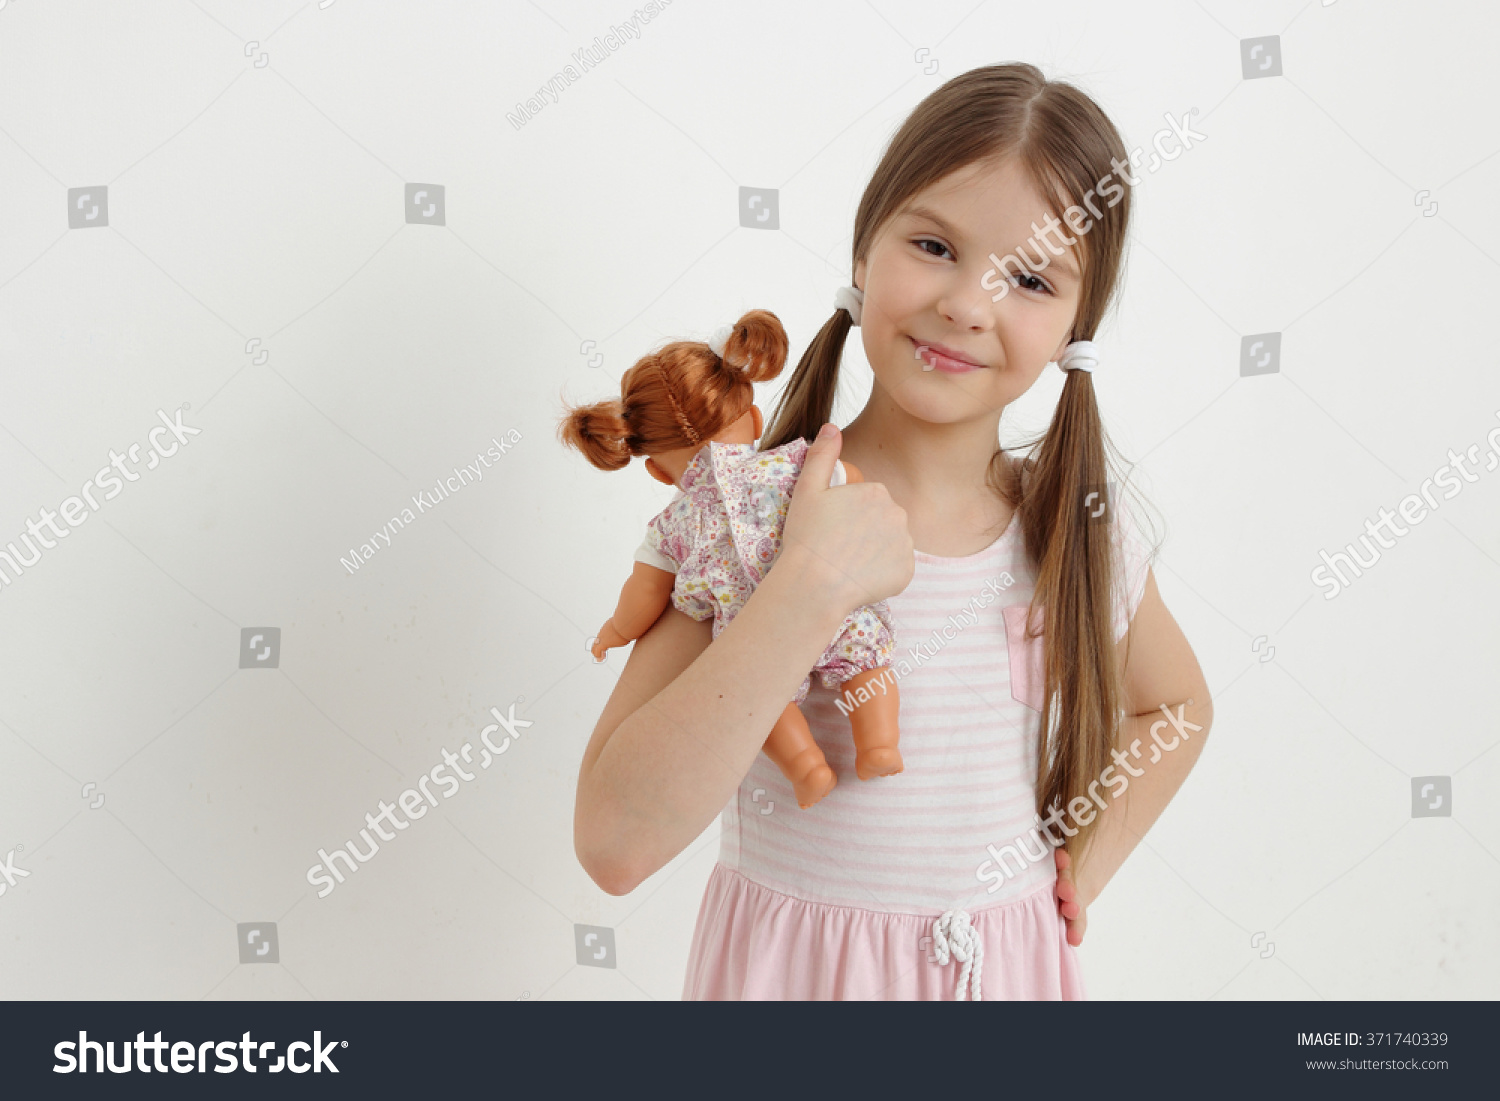 Little Girl Playing Her Baby Doll Stock Photo 371740339 ...